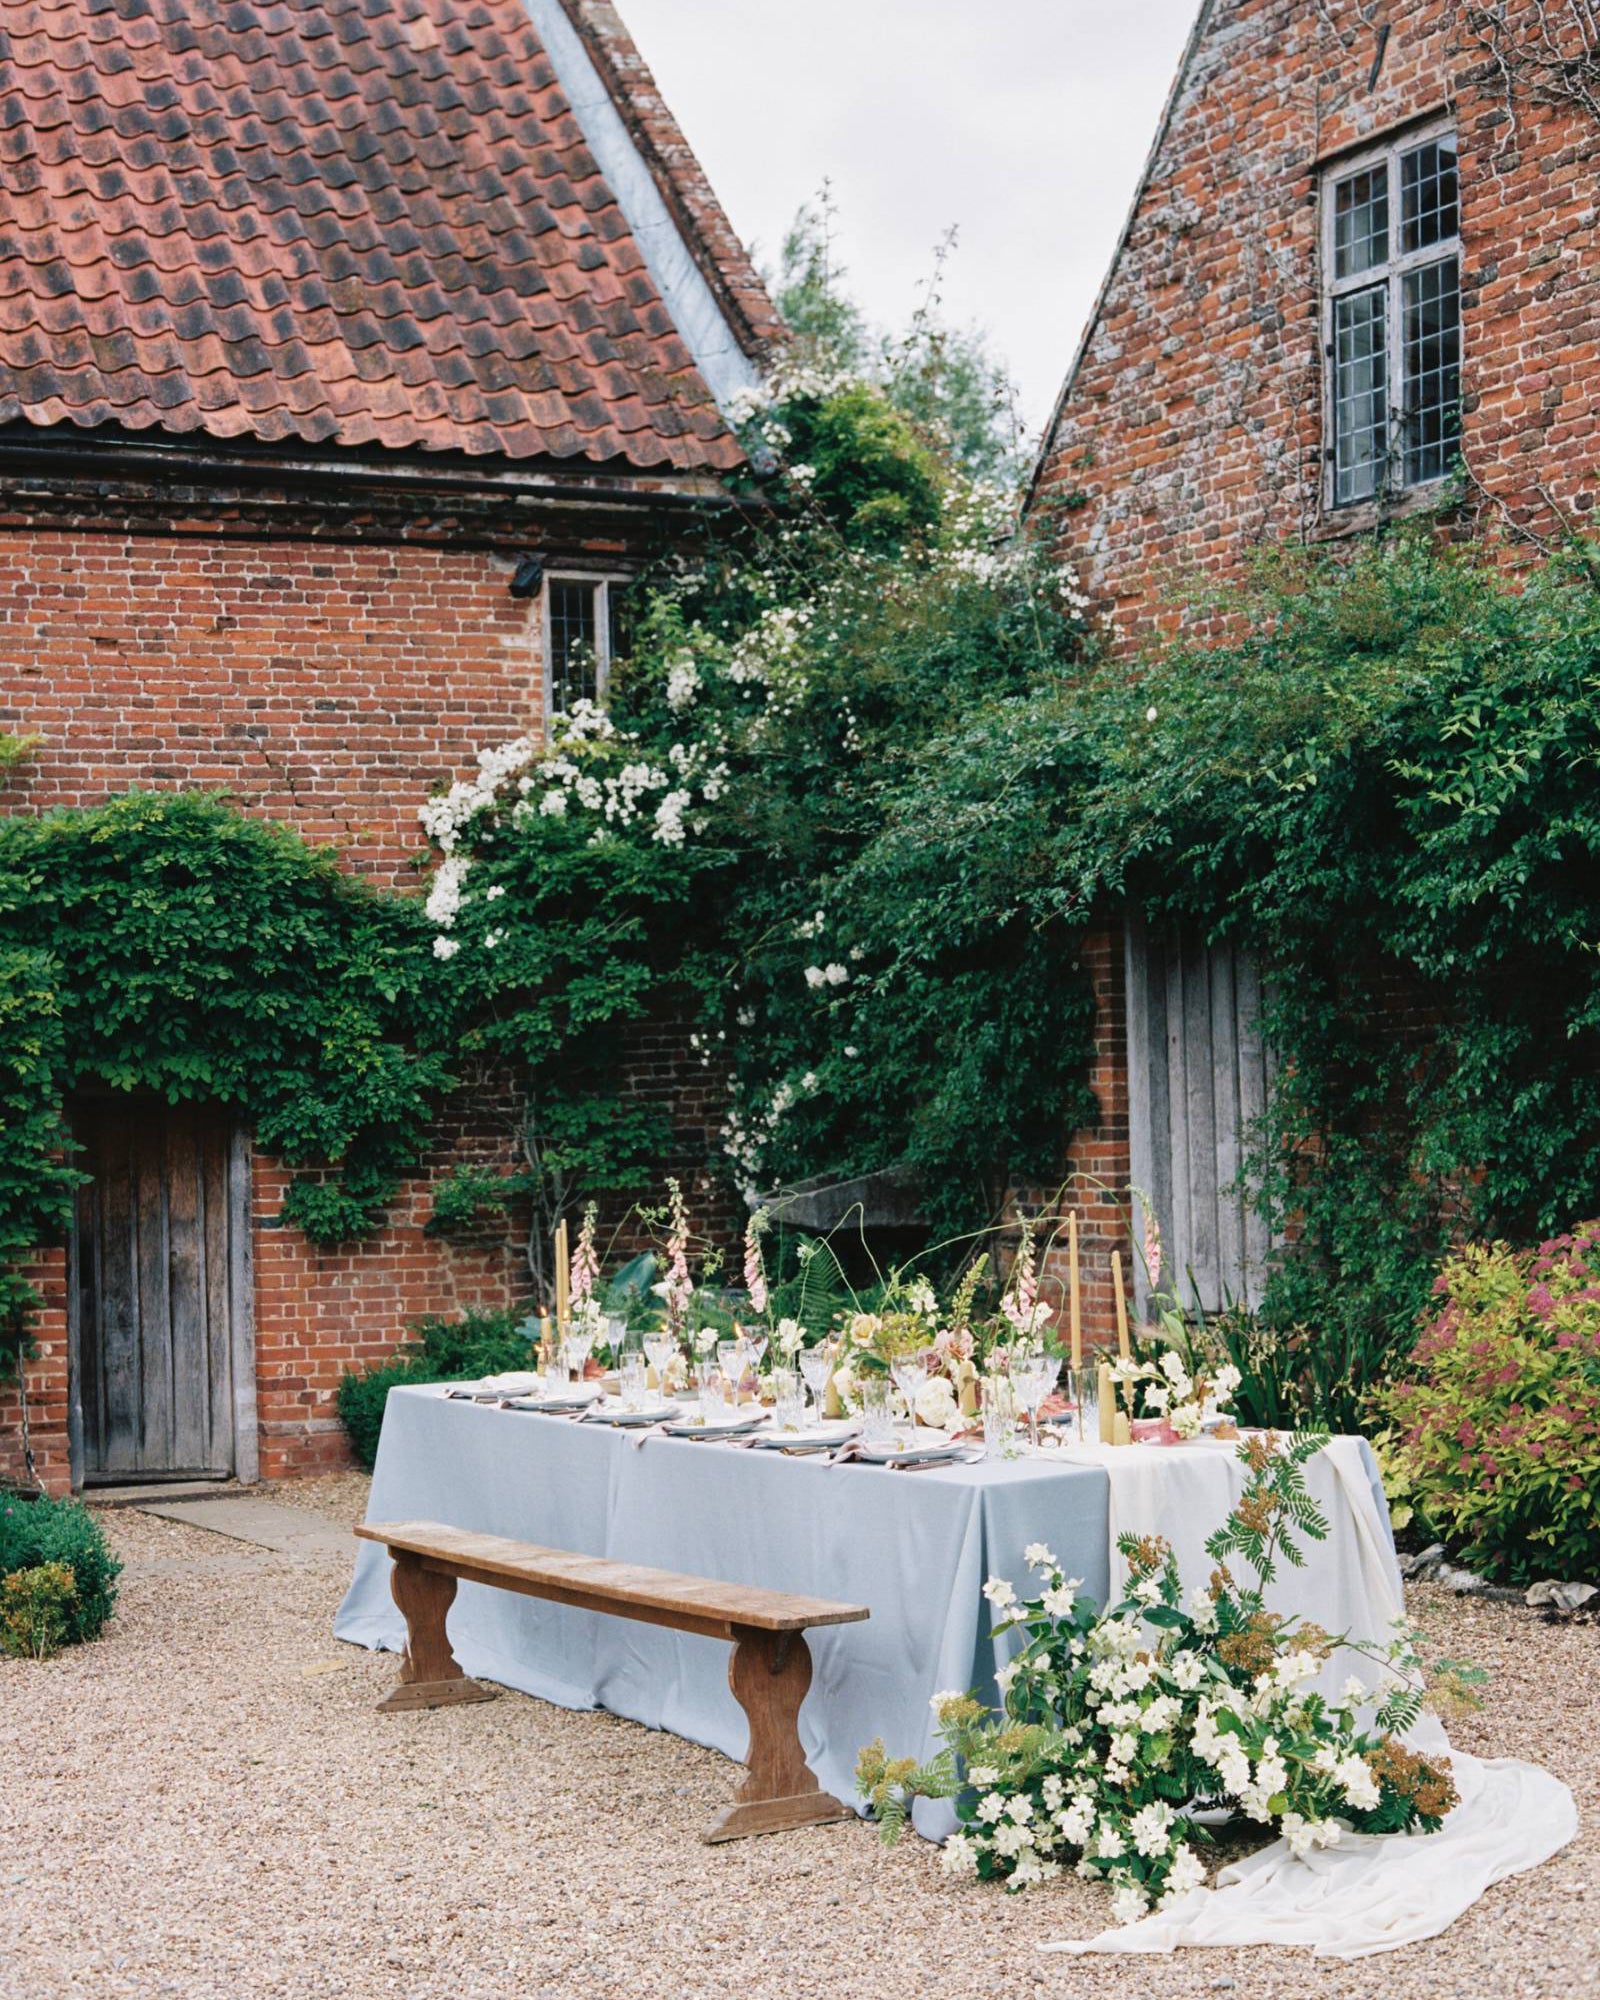 Outdoor table setting with a white tablecloth covering the table, large floral arrangements and beeswax candles. Shown in a courtyard surrounded on both sides by a period home.